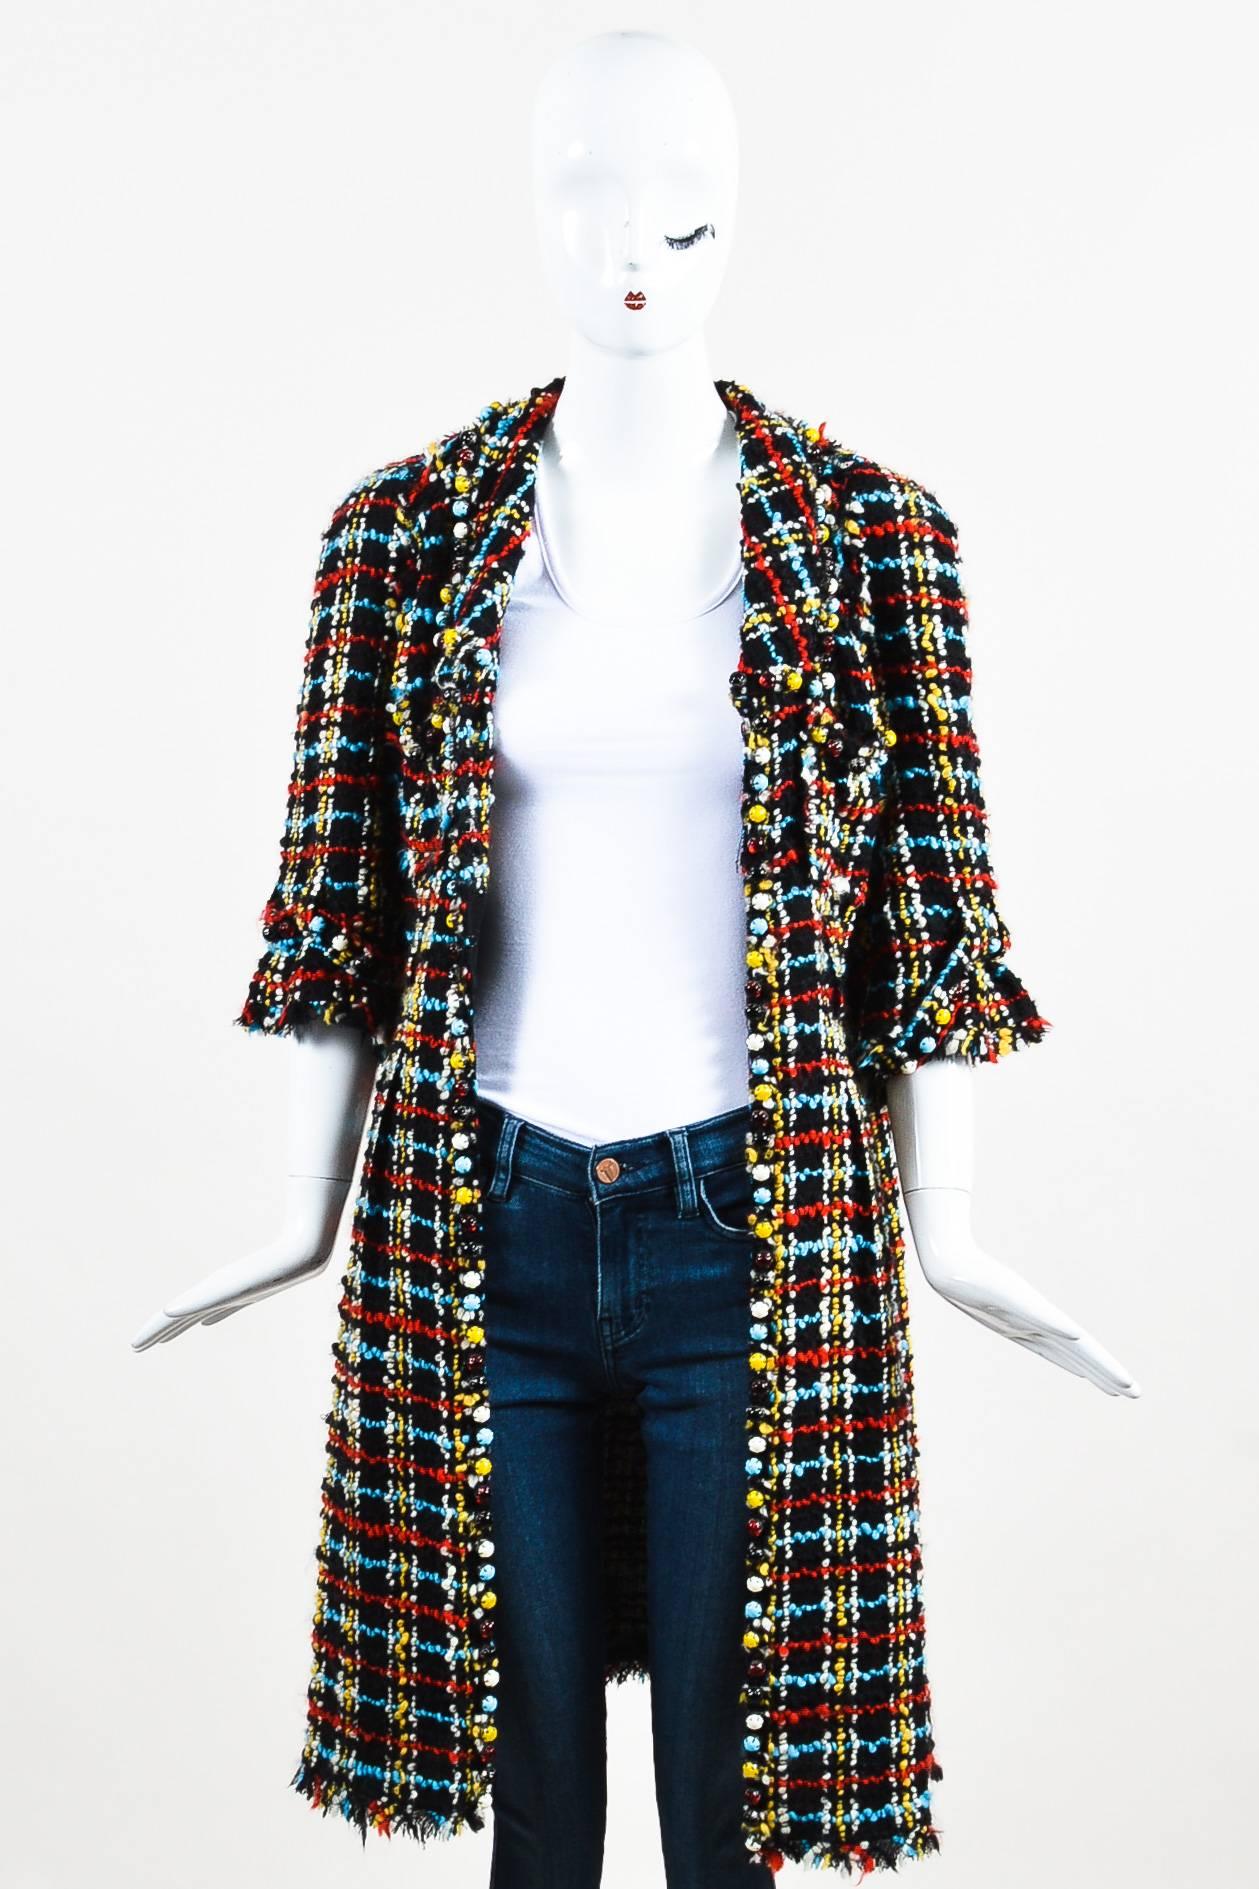 A bright and fun coat by Chanel in a vibrant colorway. This chic topper features a chunky tweed material with pops of red, blue, and yellow. Bubble beads around the collar, cuffs, and front opening in matching hues. Hook-and-eye front closure around